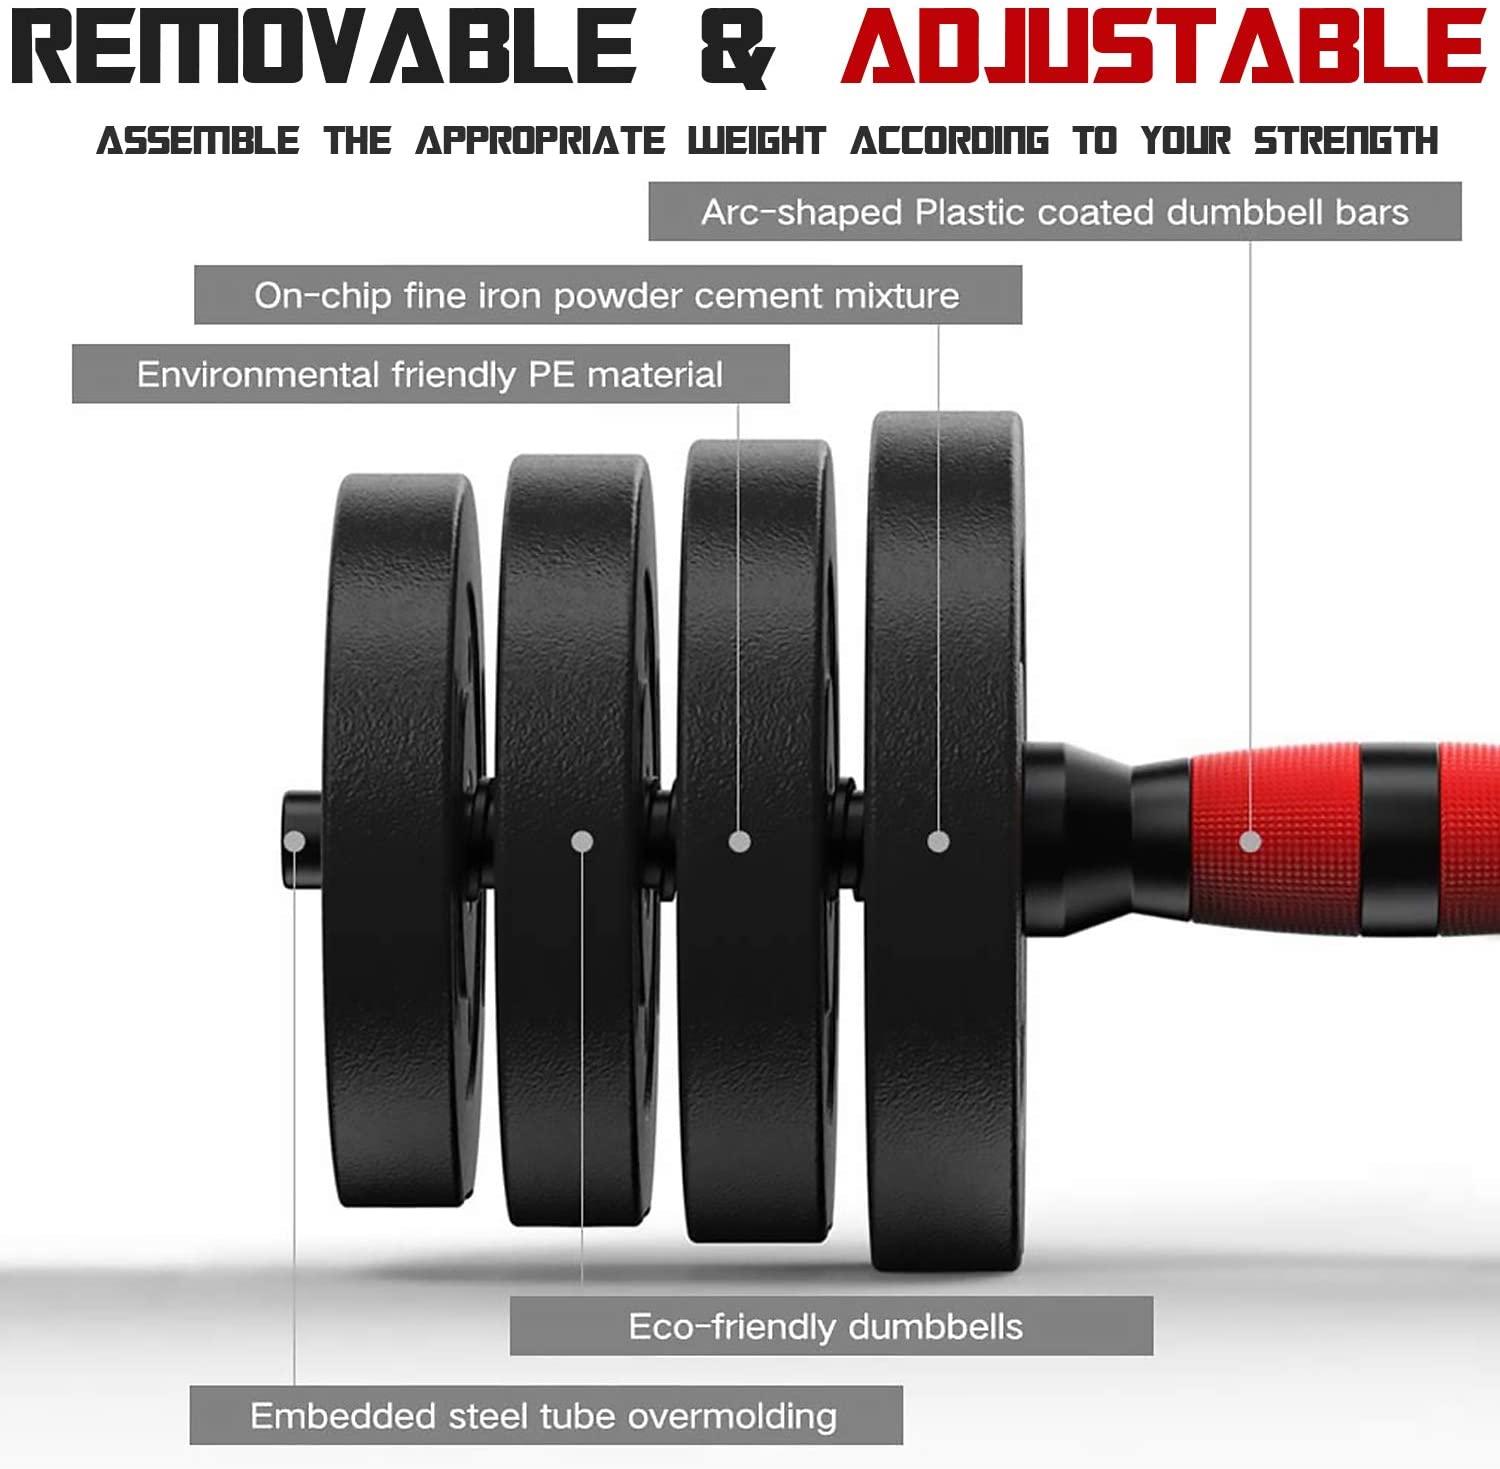 66LB Adjustable Dumbbell Weight Sets for Bodybuilding Training - image 4 of 8